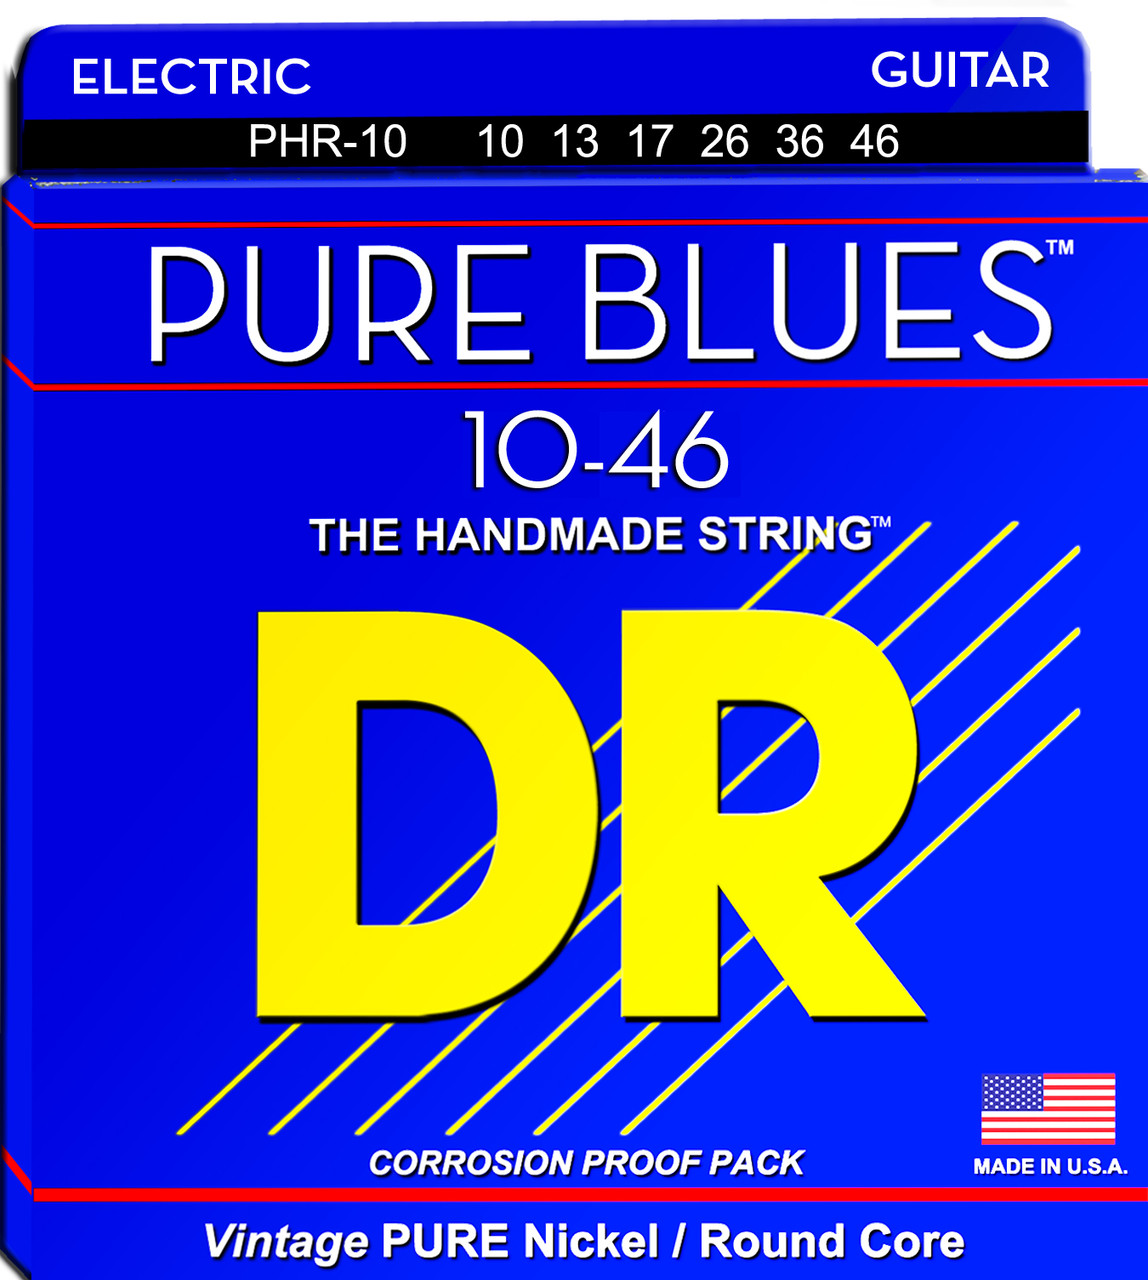 DR Pure Blues Electric Vintage Pure Nickel/Round Core 10-46 PHR-10 10 13 17 26 36 46